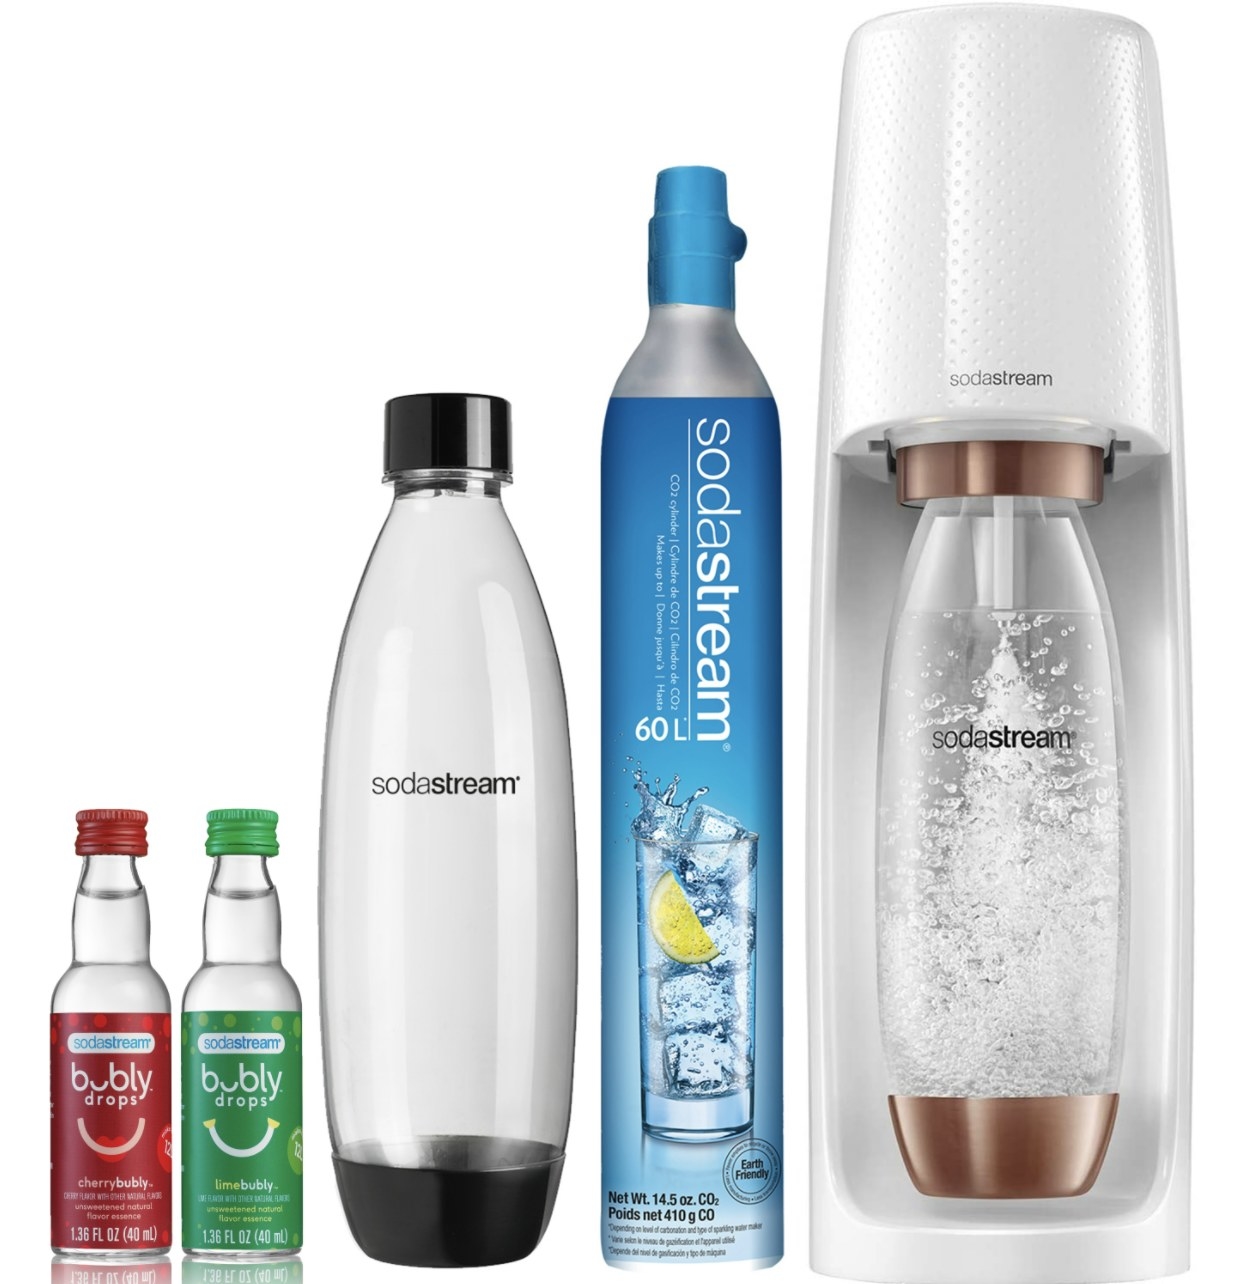 The sat has two bubly drops, two sodastream containers, the sodastream machine and a CO2 container